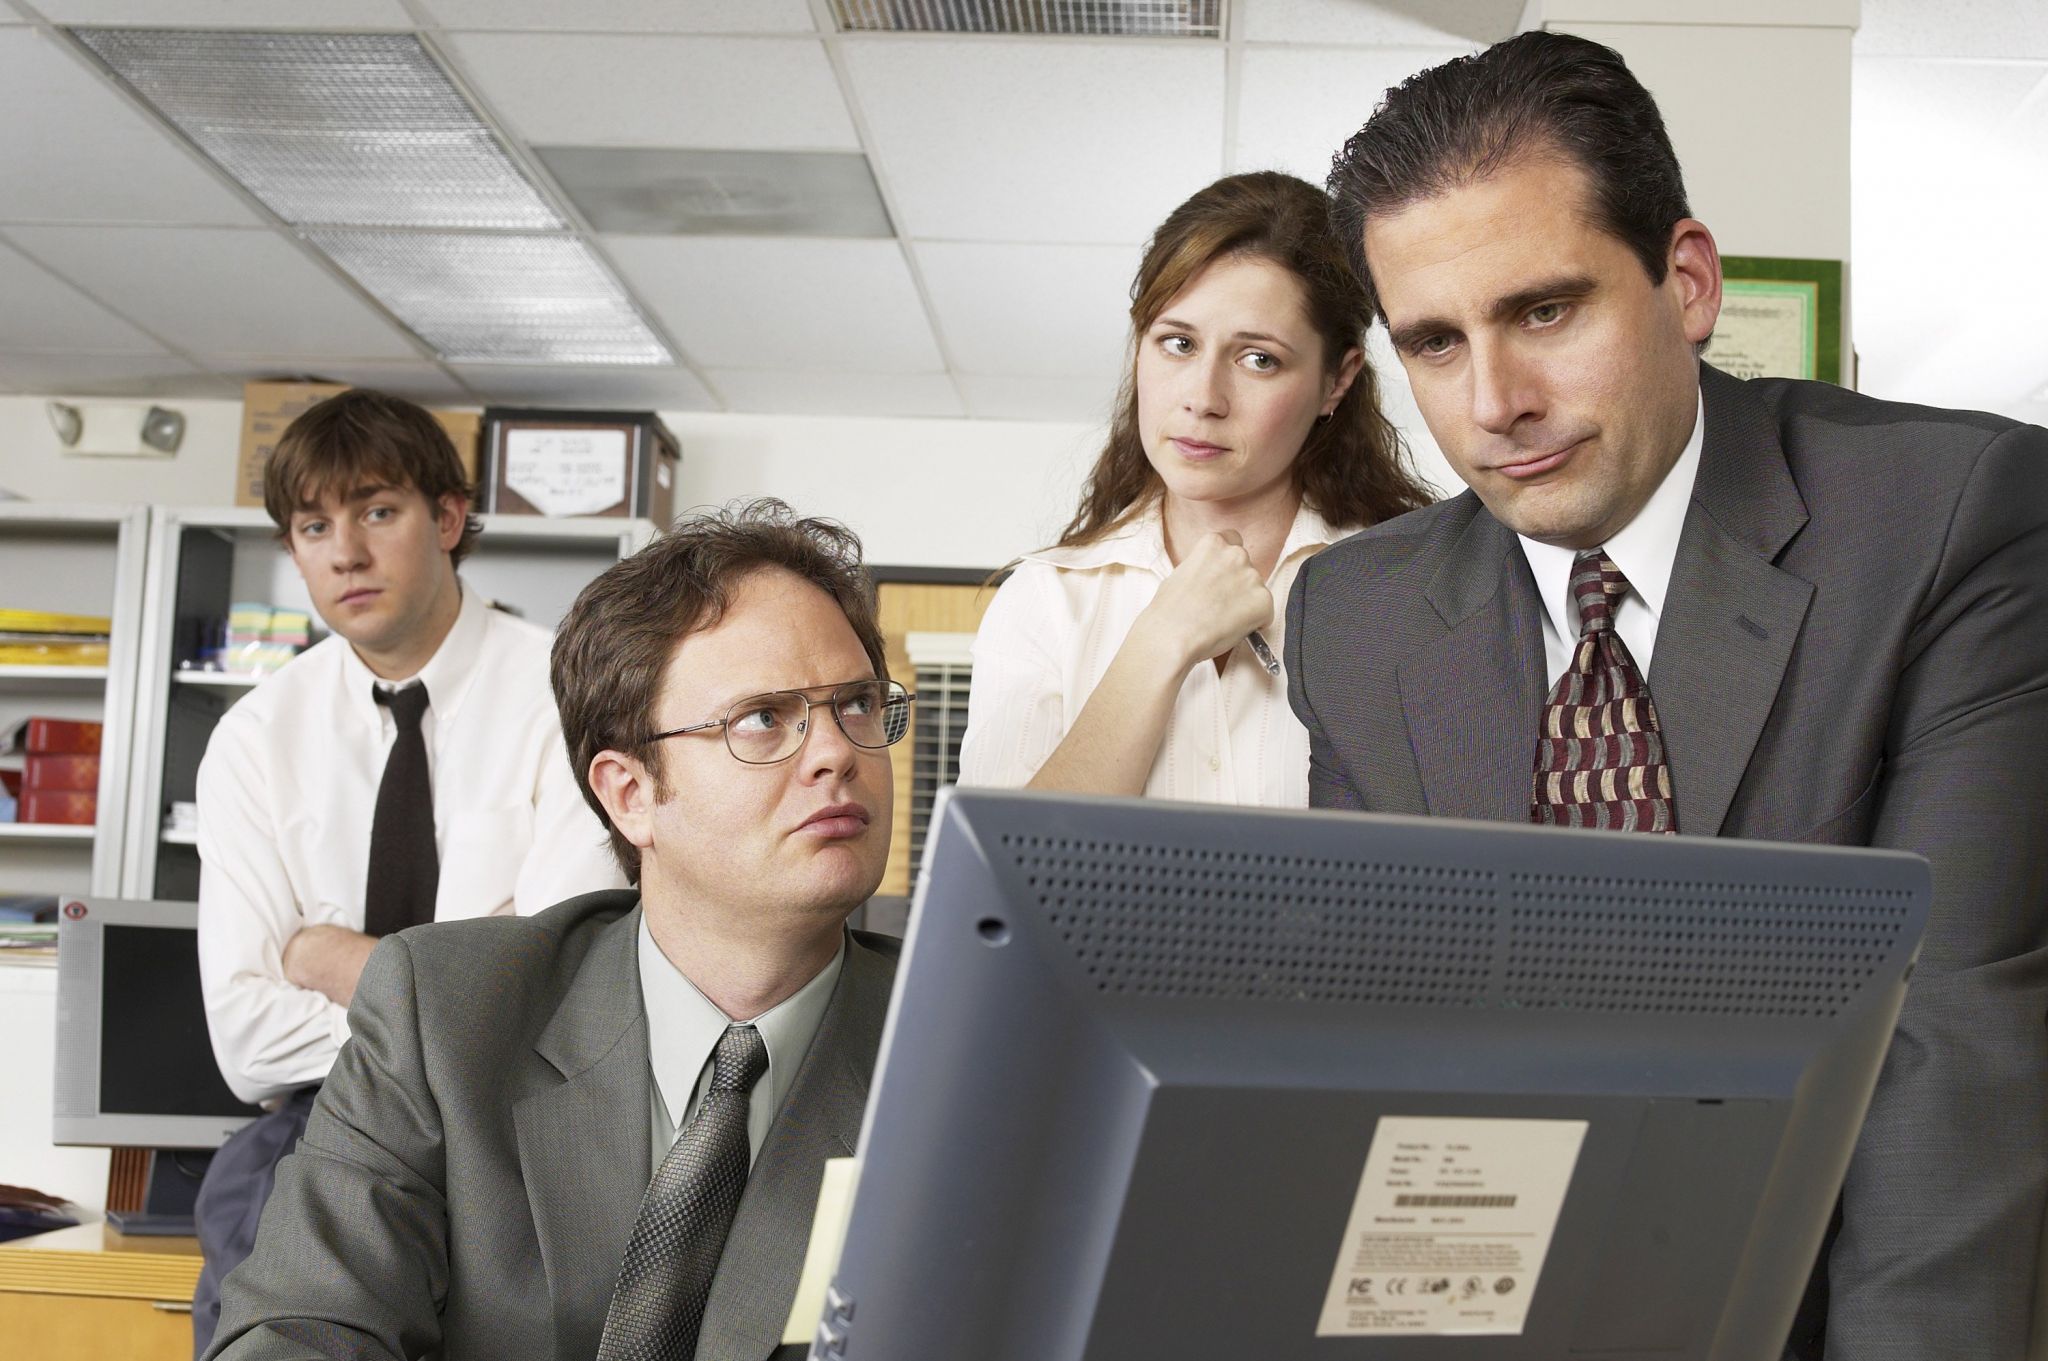 The Office's best episode is “Office Olympics.” Skip Season 1 and start  here. (VIDEO)